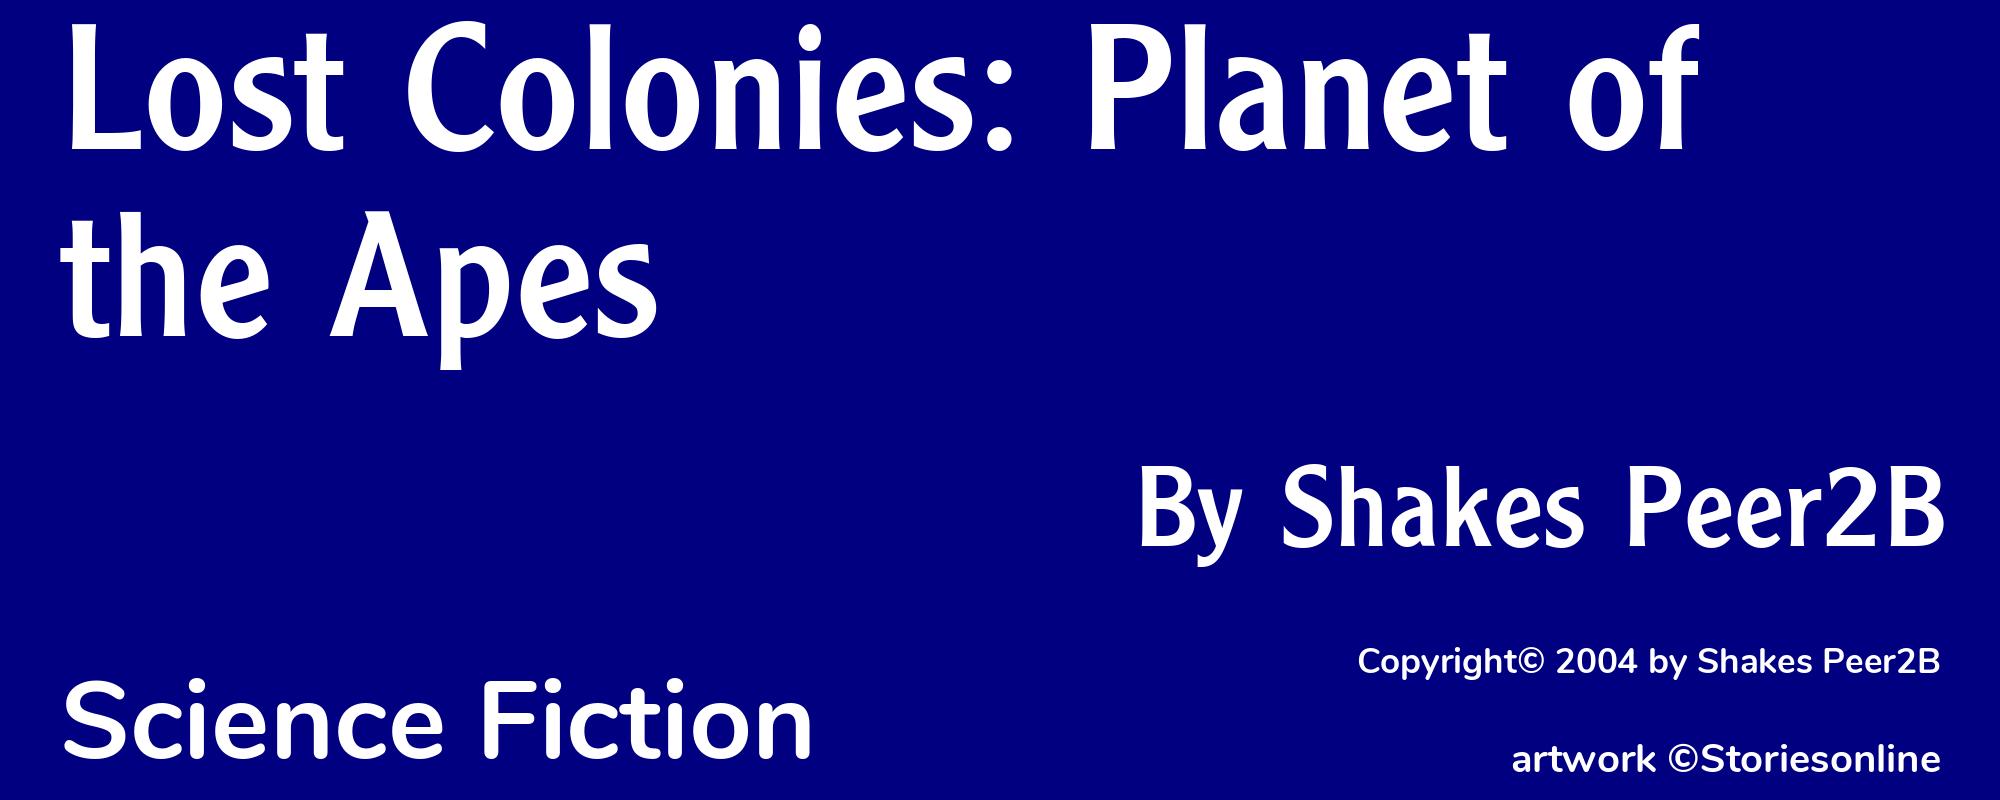 Lost Colonies: Planet of the Apes - Cover